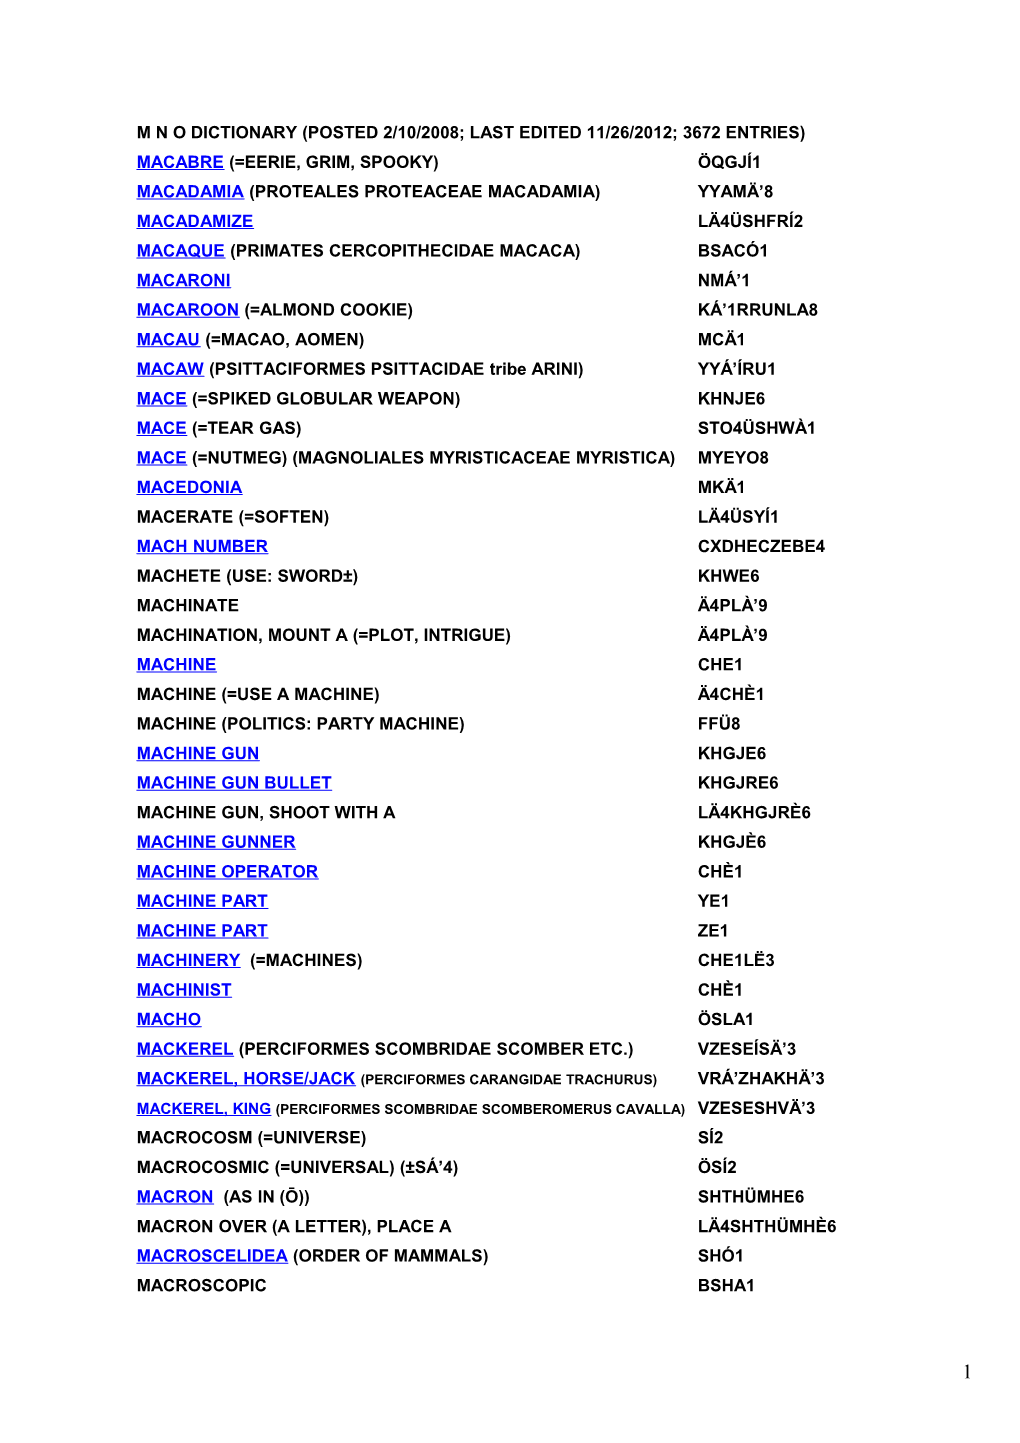 M N O Dictionary (Posted 2/10/2008; Last Edited 11/26/2012; 3672Entries)